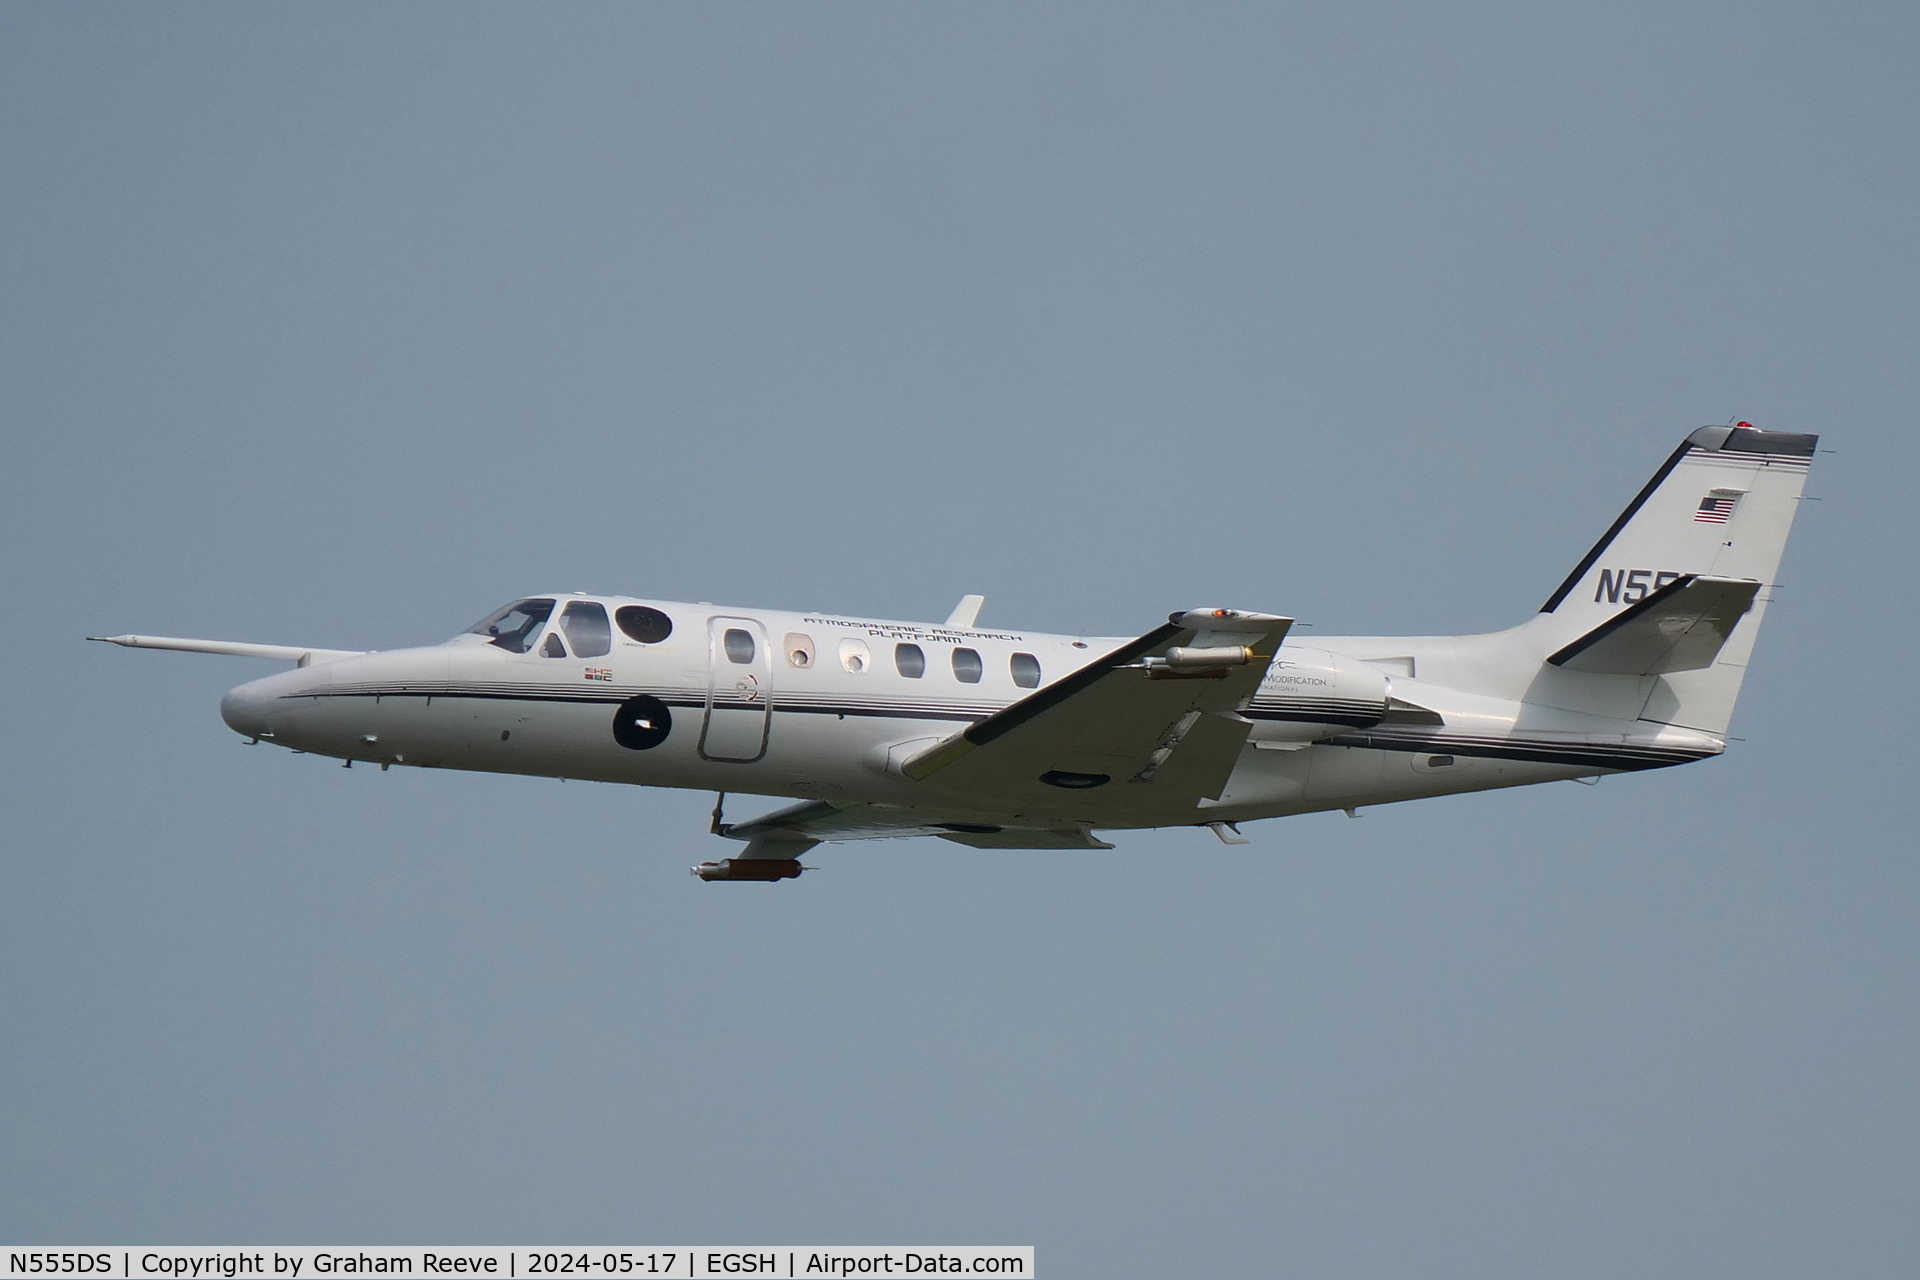 N555DS, 1981 Cessna 550 C/N 550-0275, Departing from Norwich.